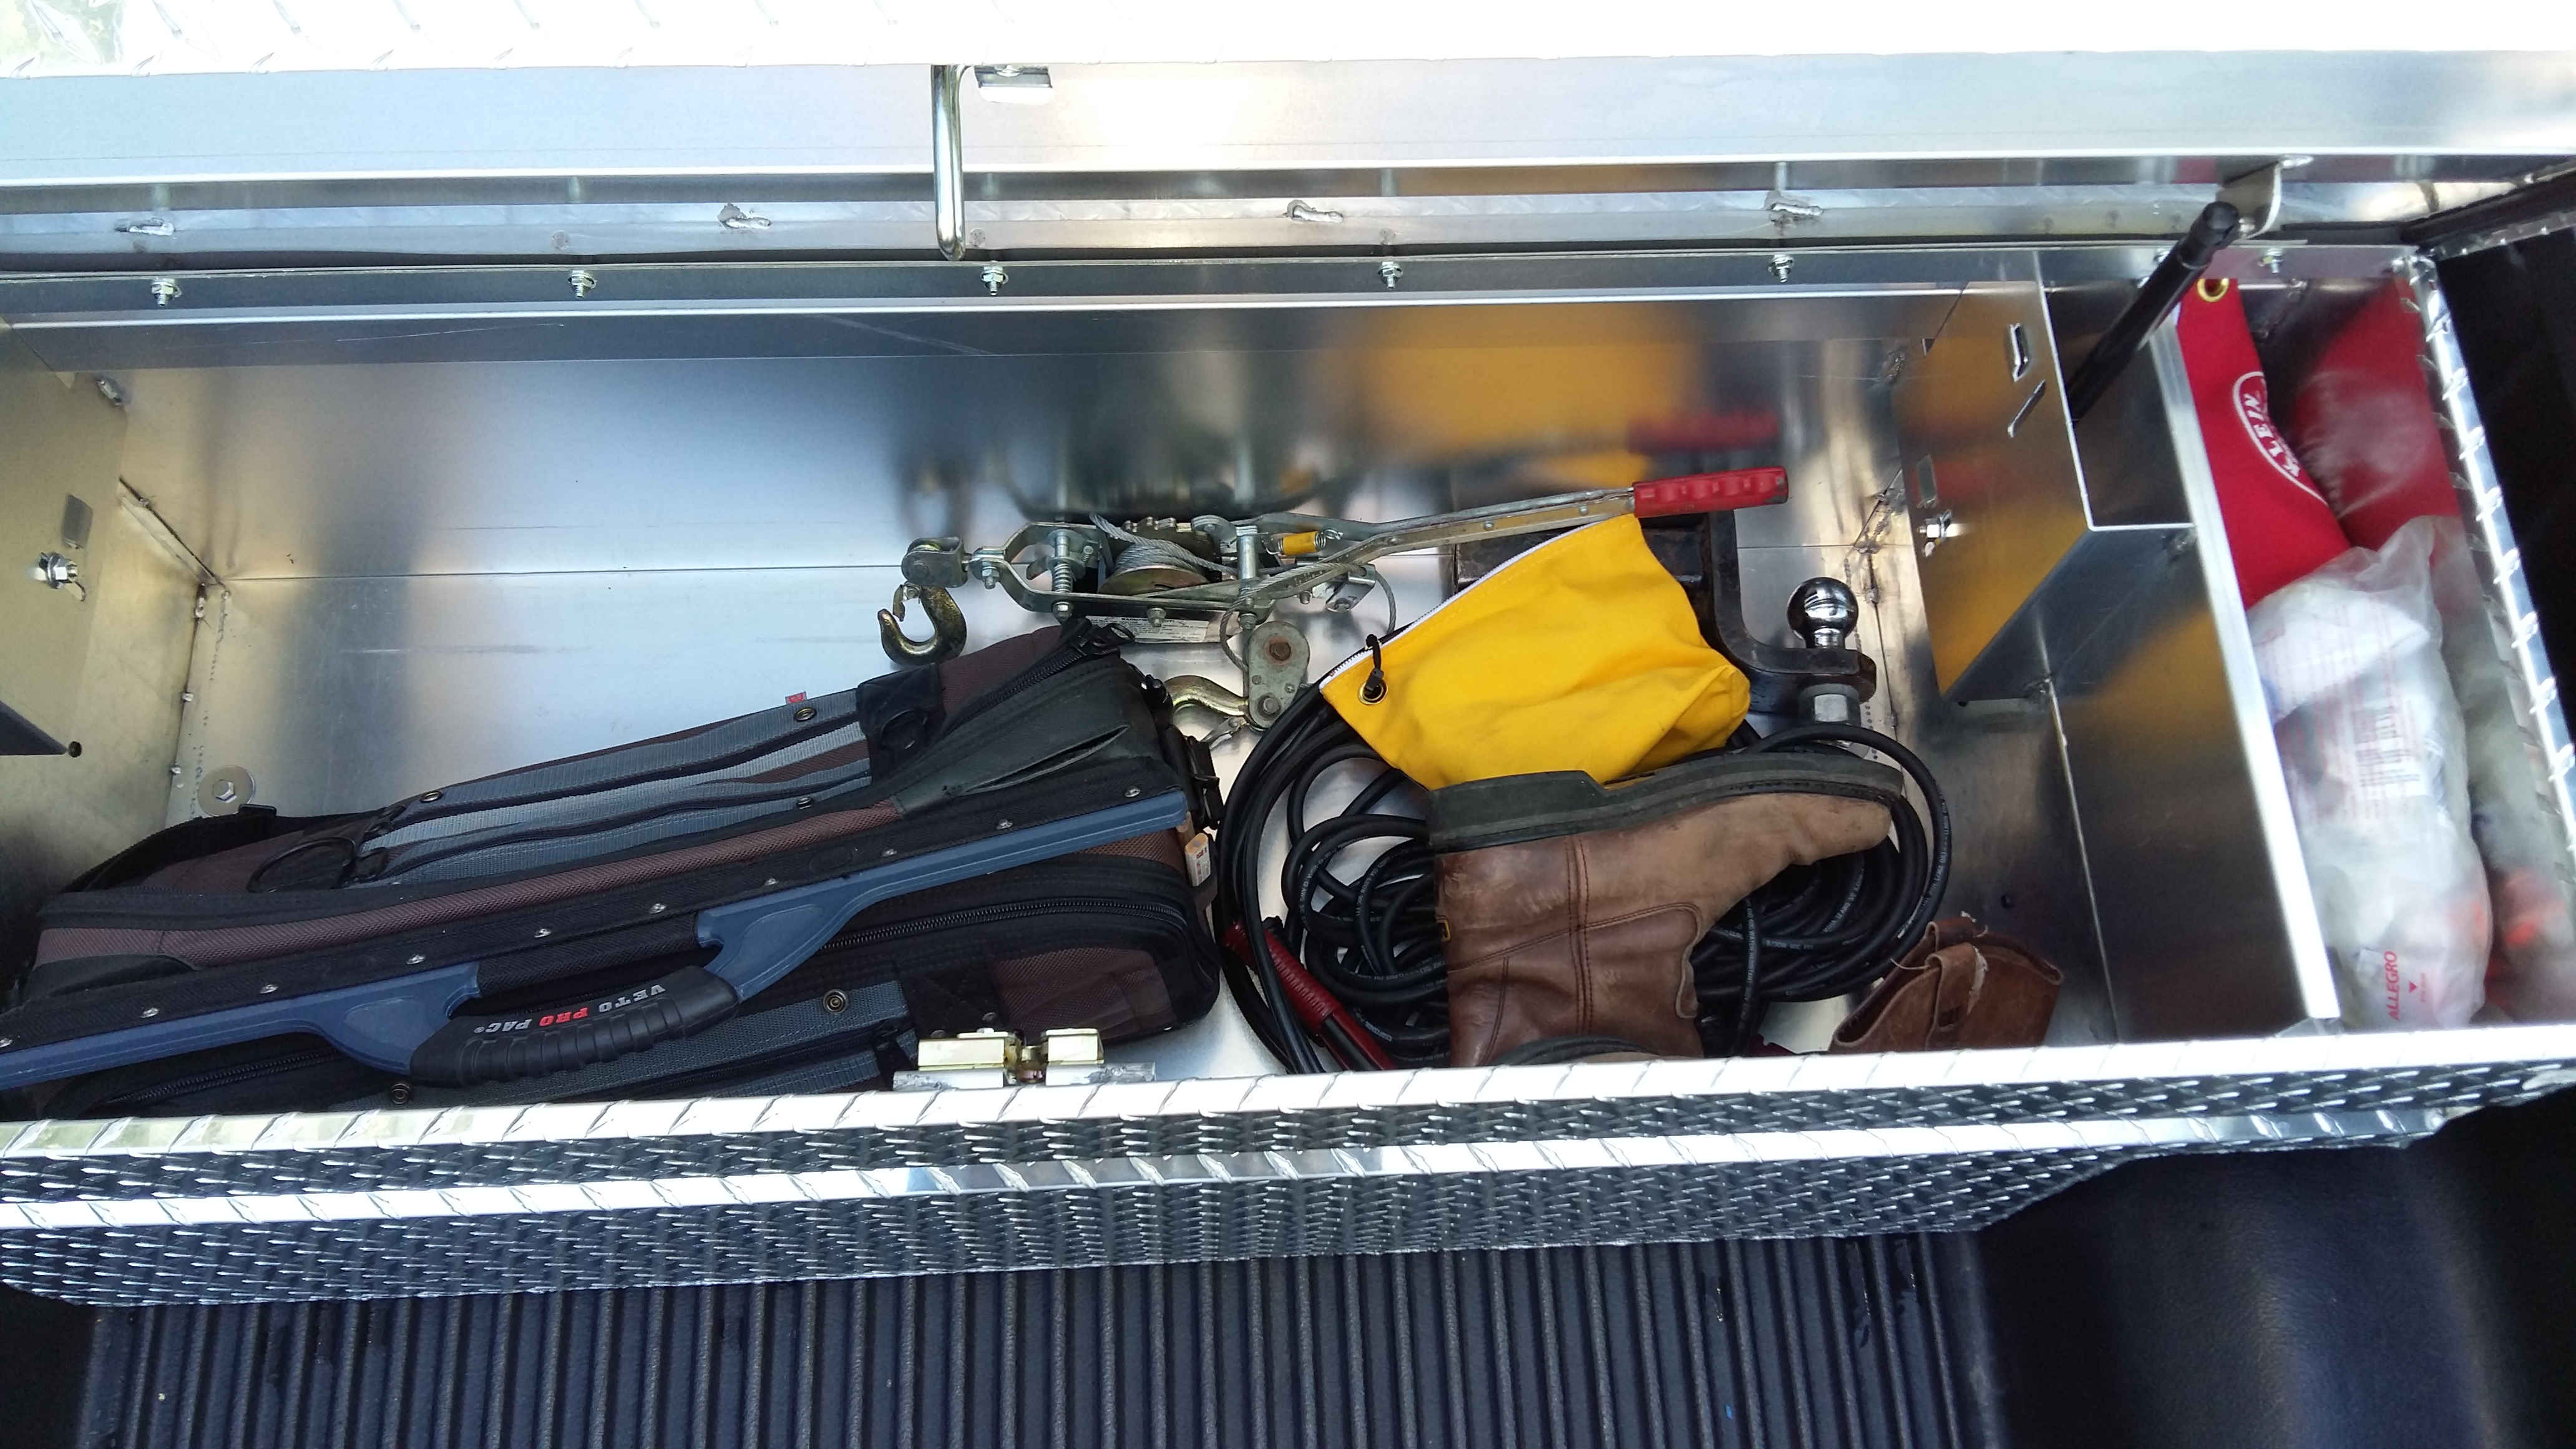 Custom Weatherguard Toolbox for 2013 F-150 Crew - Ford F150 Forum -  Community of Ford Truck Fans